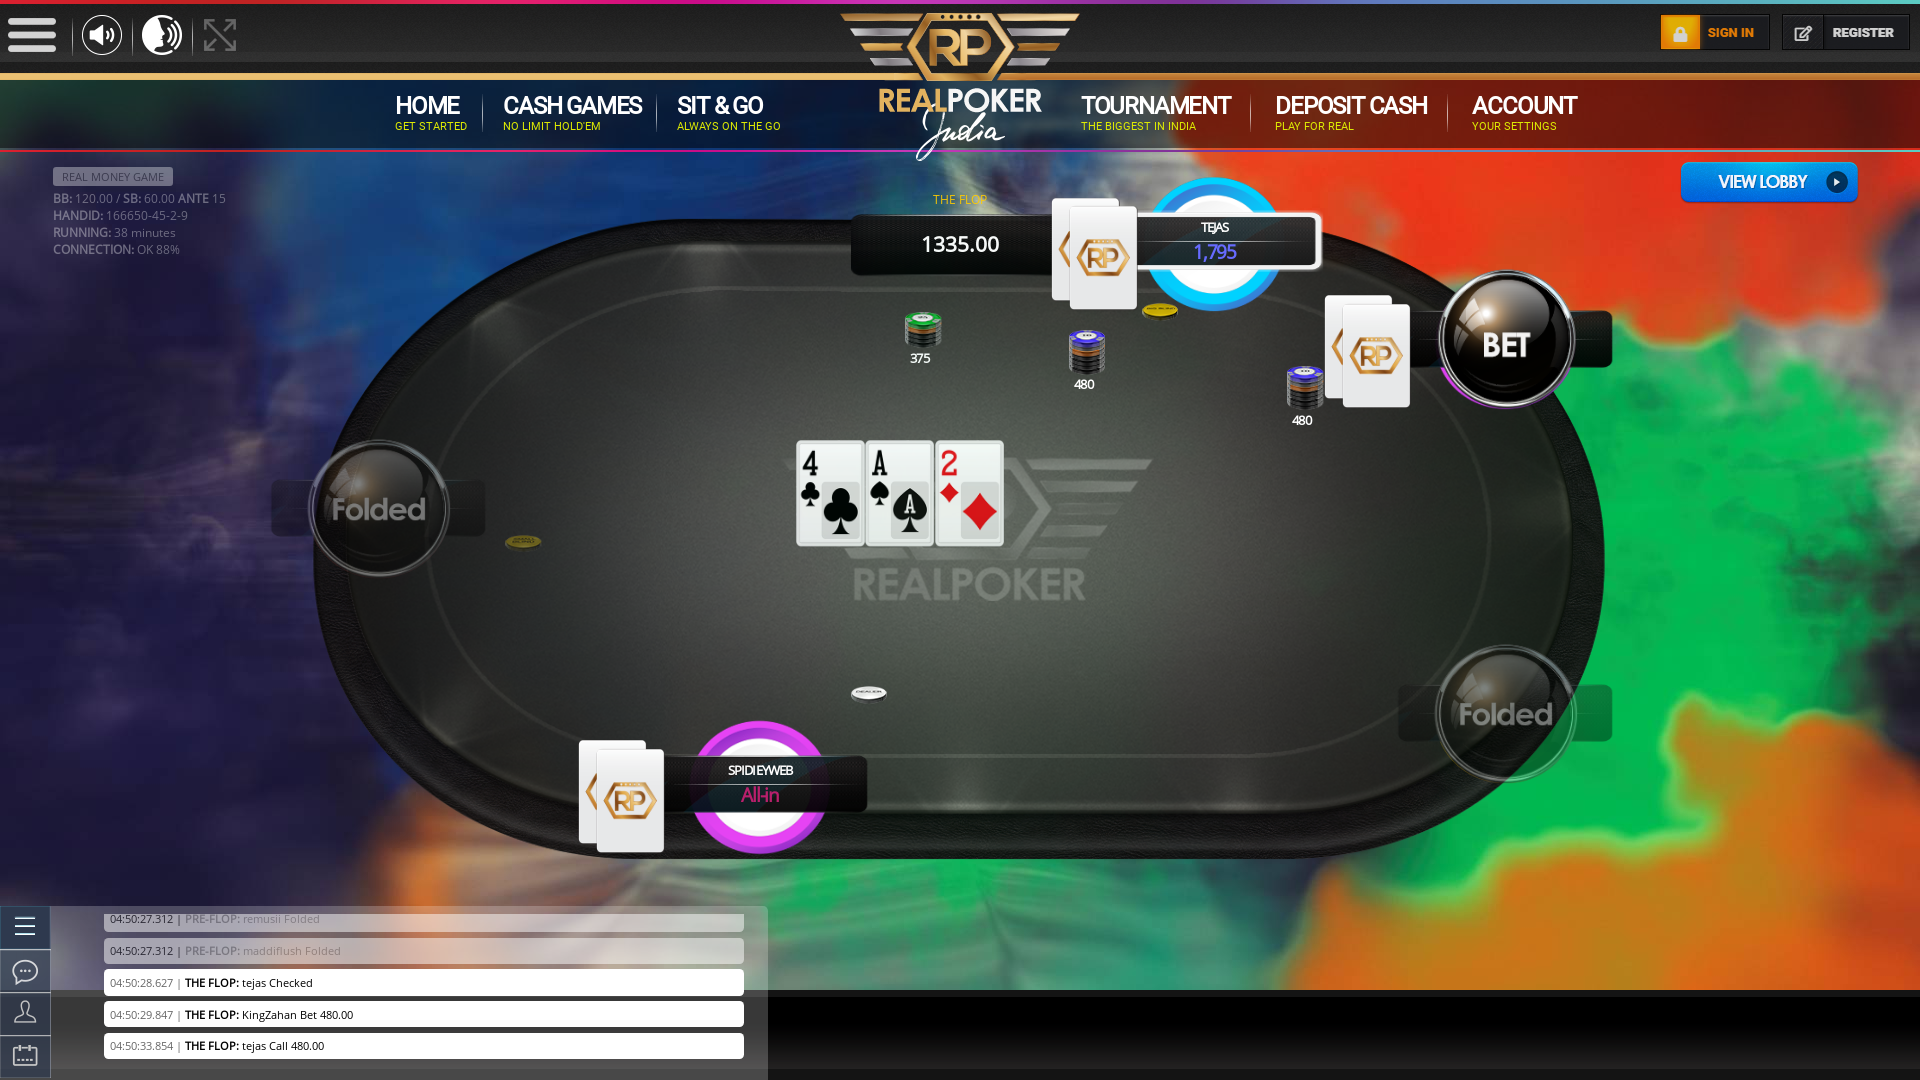 Online poker on a 10 player table in the 38th minute match up